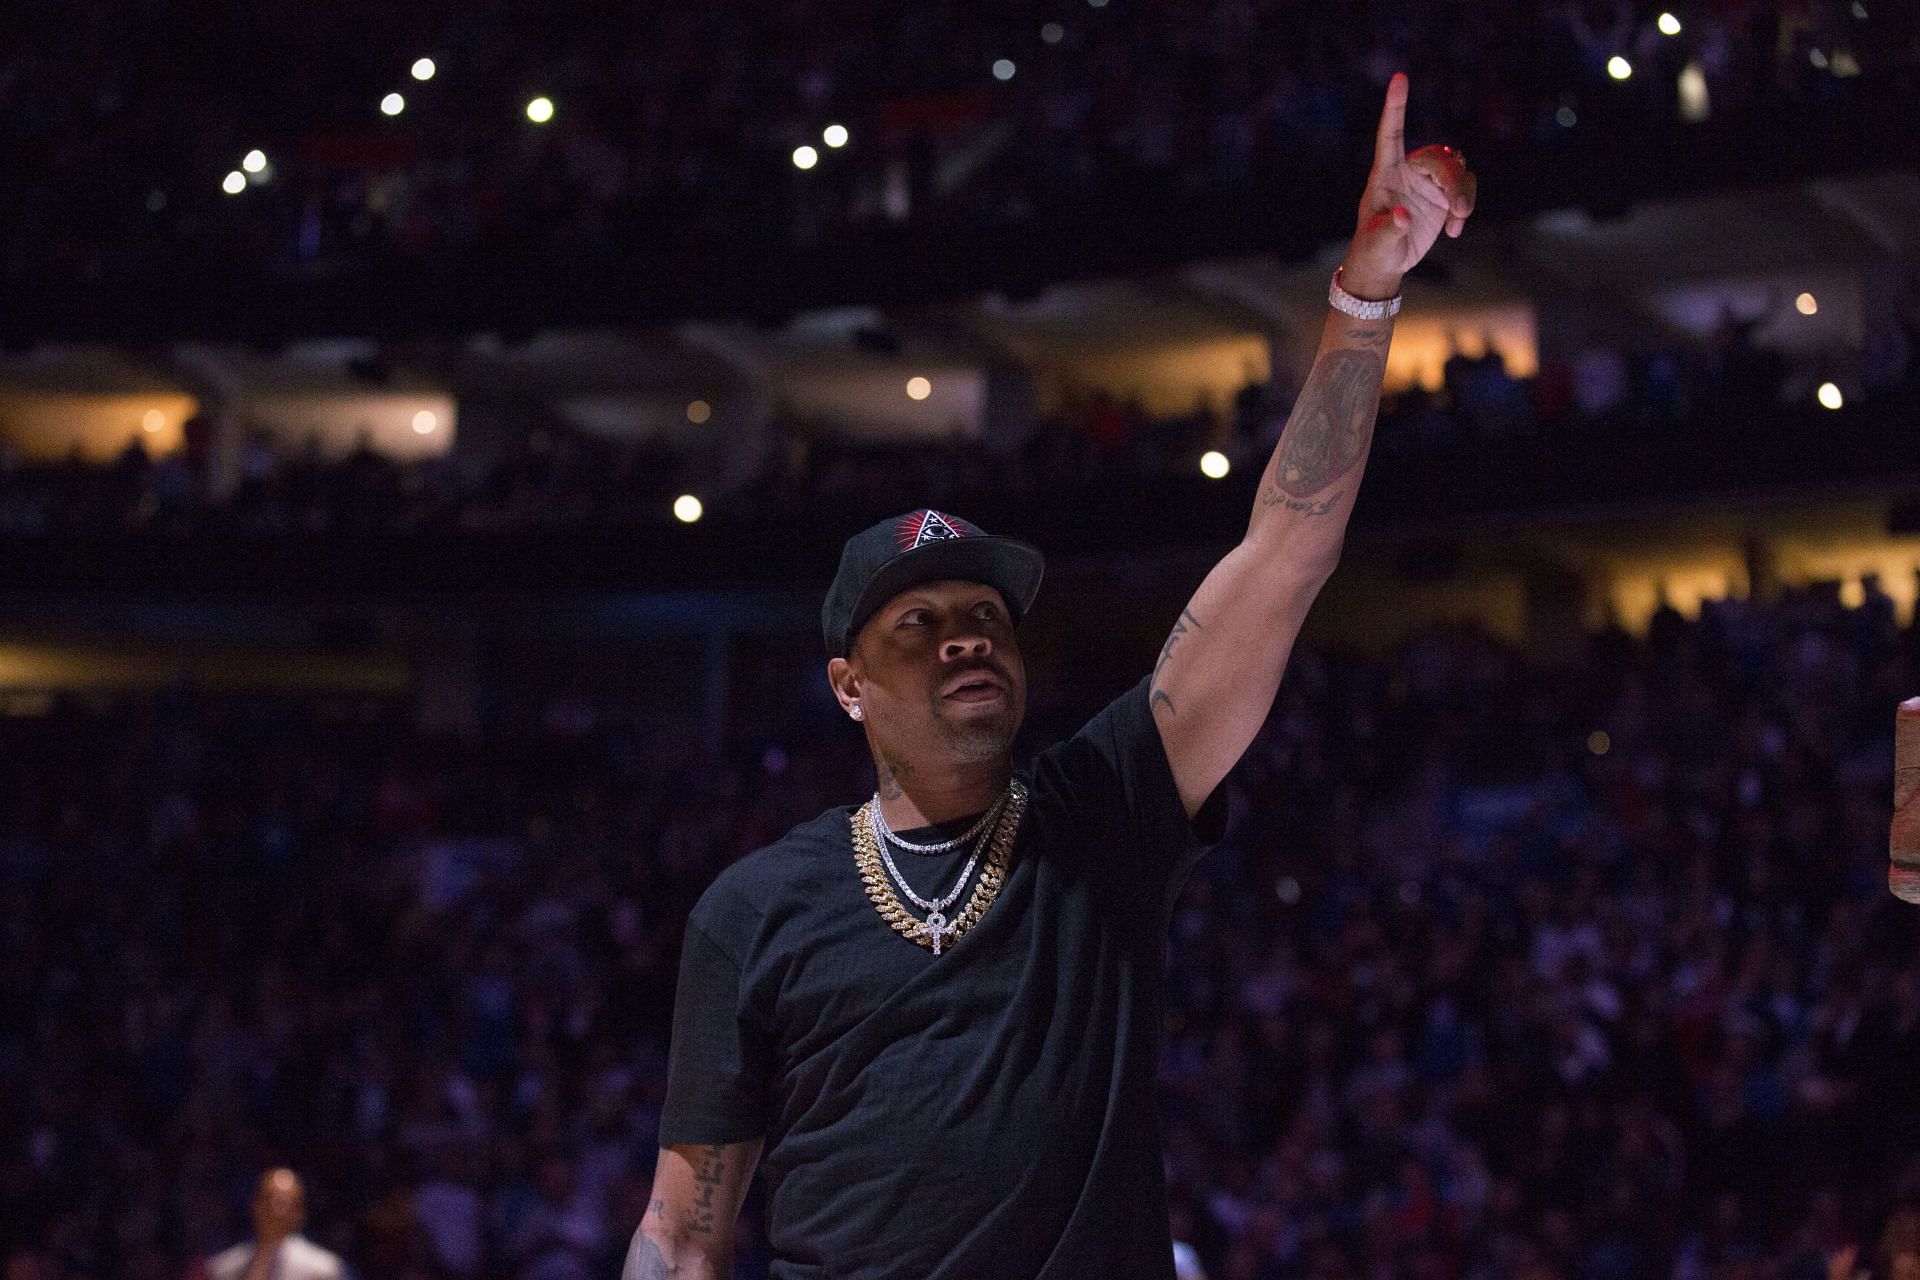 Hall of famer Allen Iverson salutes the crowd prior to the game between the Utah Jazz and the Philadelphia 76ers.